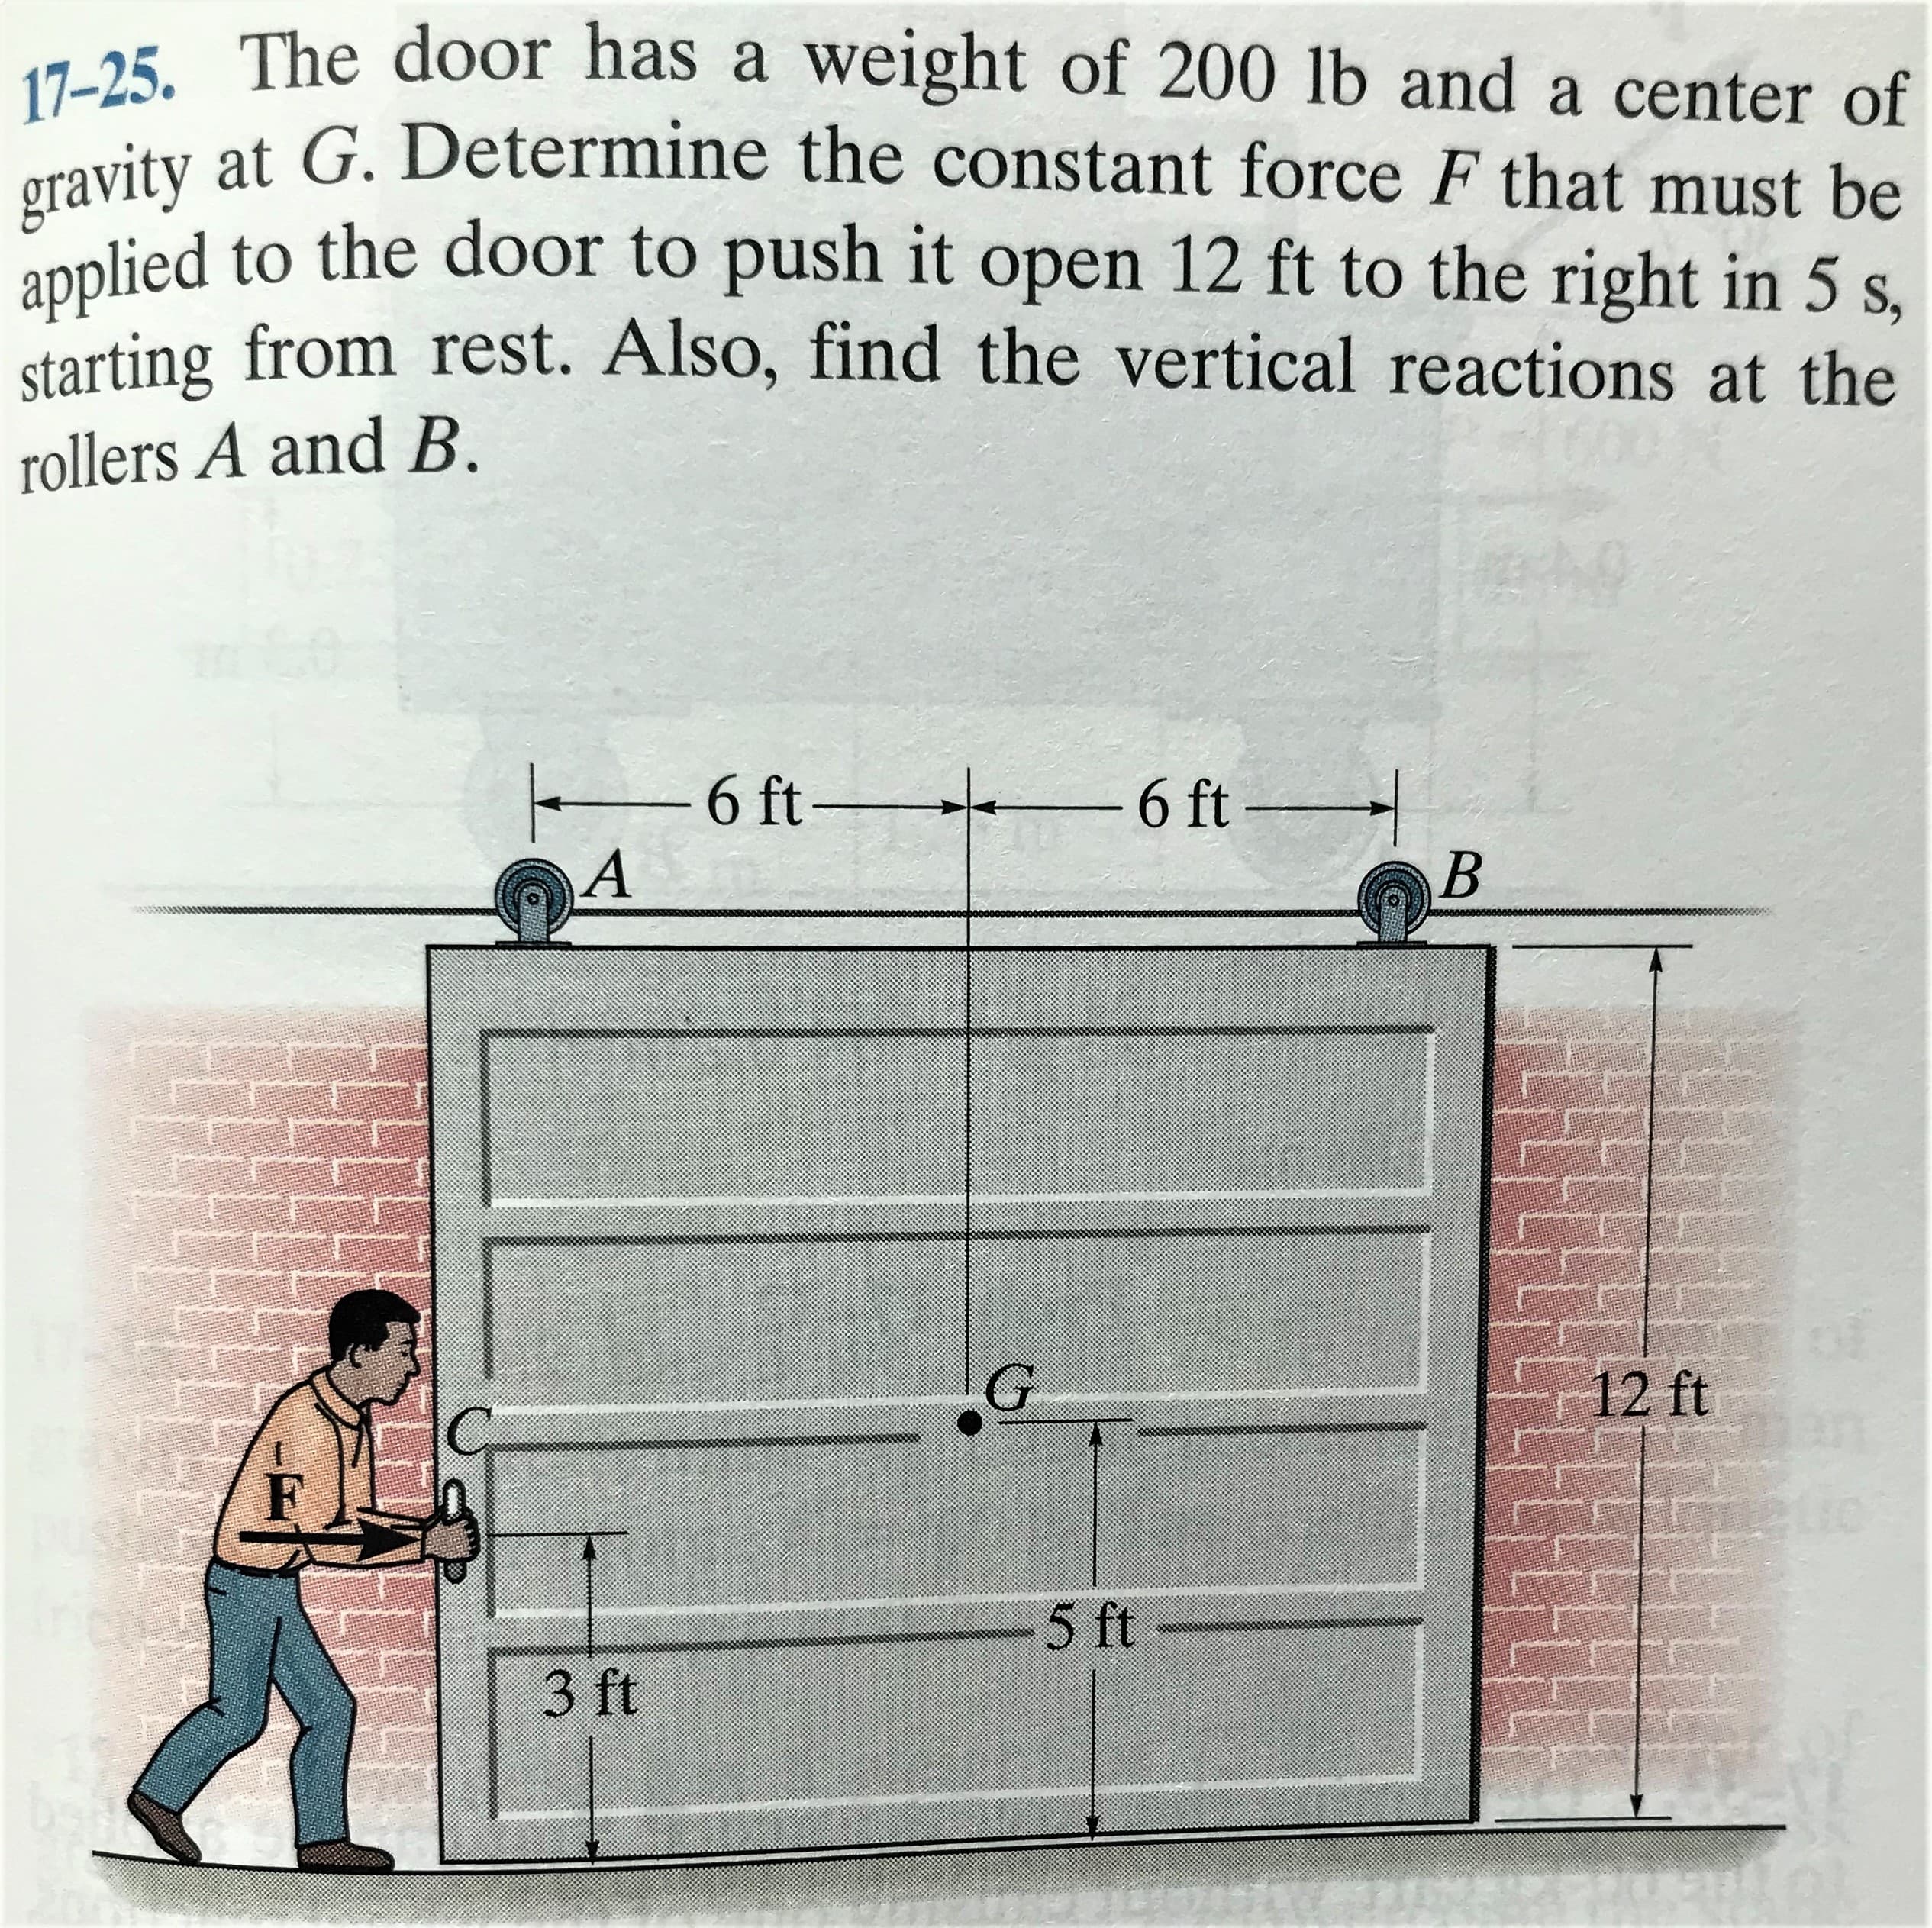 17-25. The door has a weight of 200 lb and a center of
uity at G. Determine the constant force F that must be
oplied to the door to push it open 12 ft to the right in 5 s,
starting from rest. Also, find the vertical reactions at the
rollers A and B.
-6 ft-
-6 ft
A
12 ft
5 ft
3 ft
